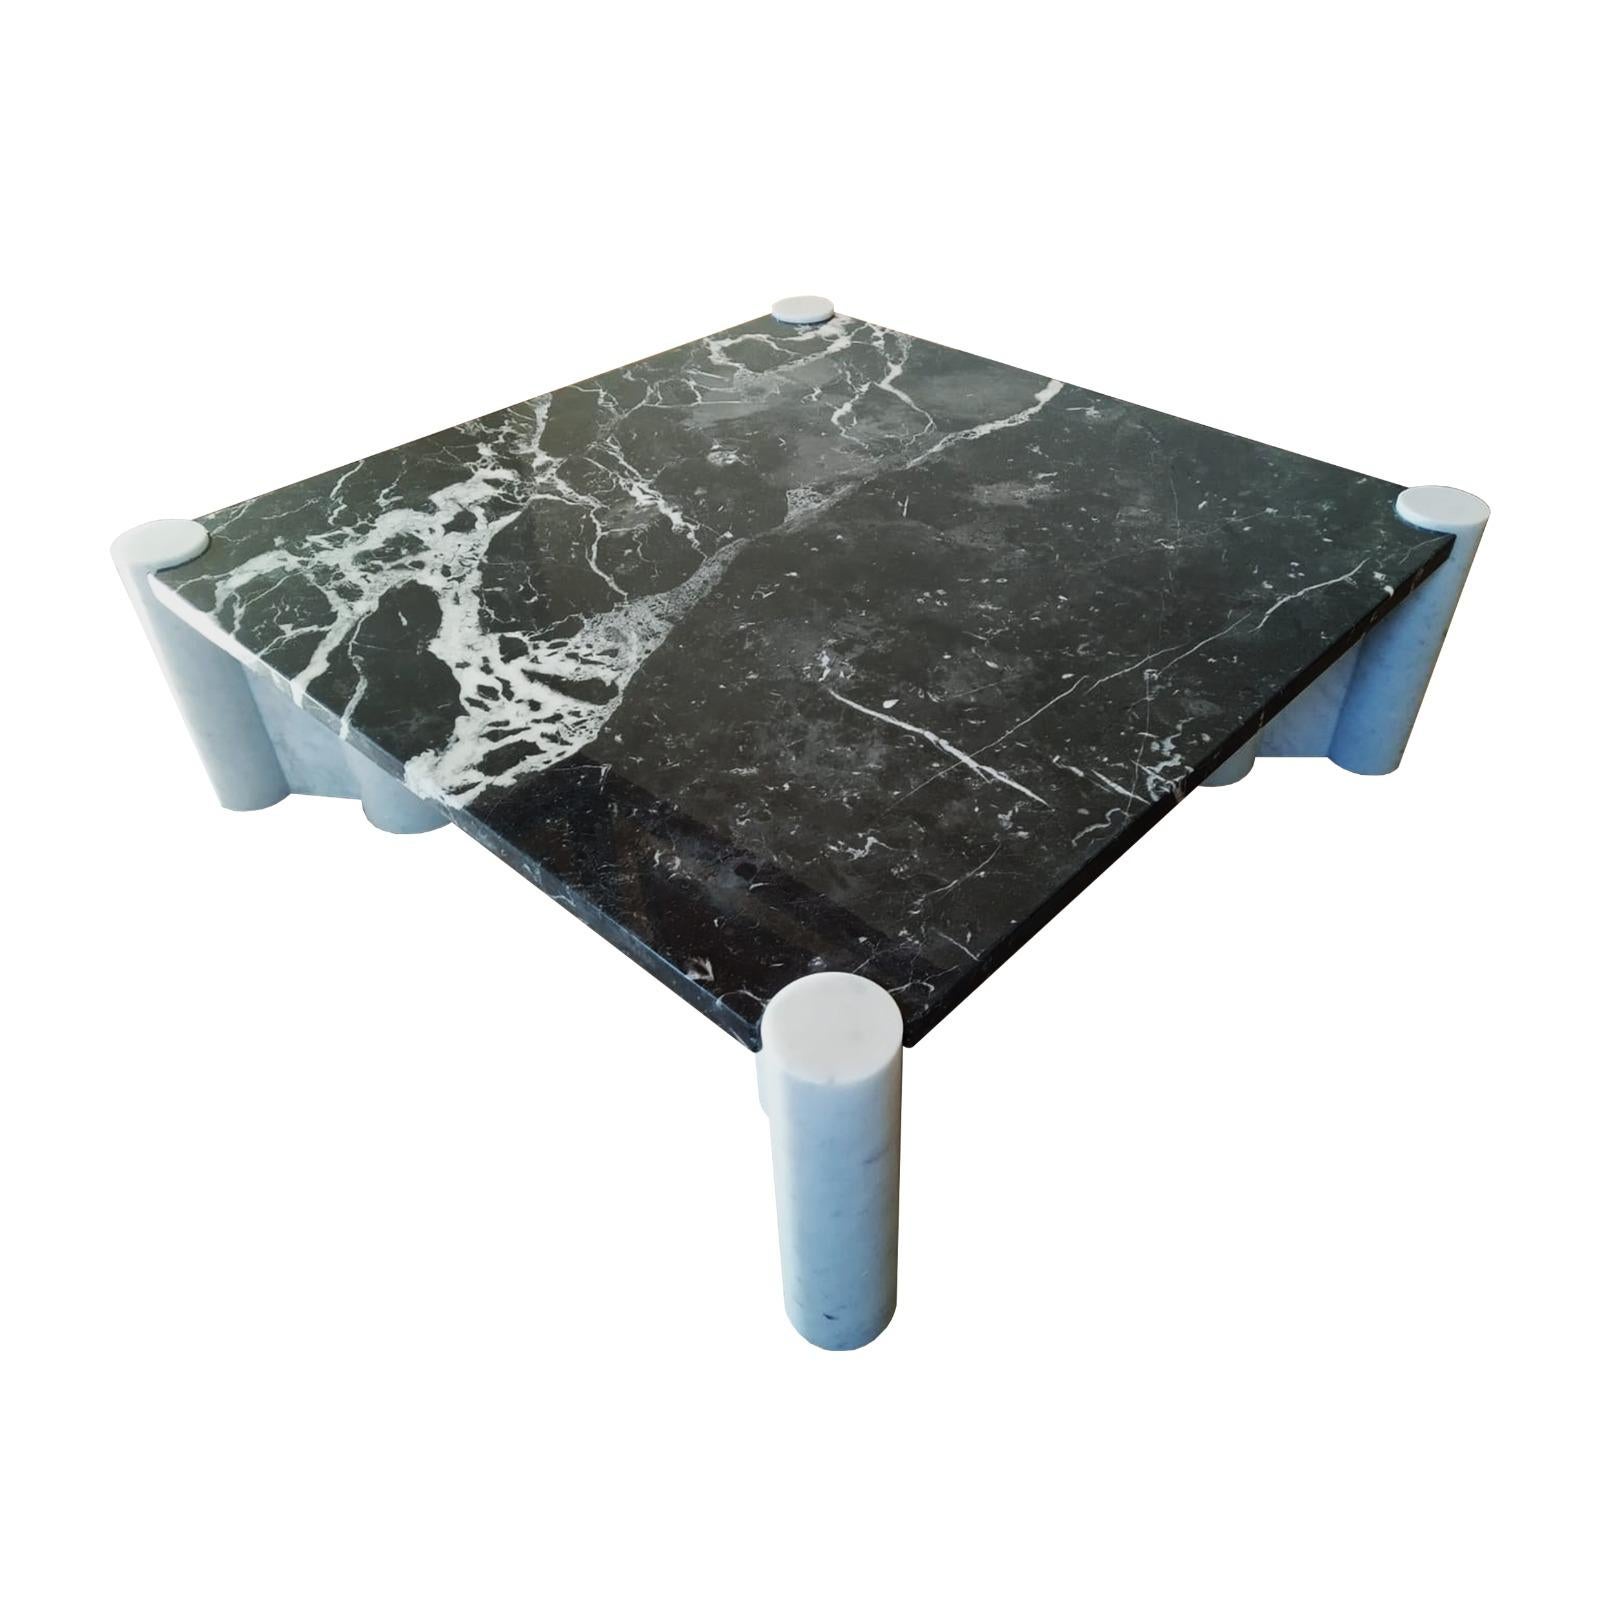 Jumbo coffee table, designed by Gae Aulenti and produced by the American manufacturer Knoll international in 1965.

Legs made of white Carrara marble, tabletop of black Marquina marble.

Excellent vintage condition.

Gaetana 